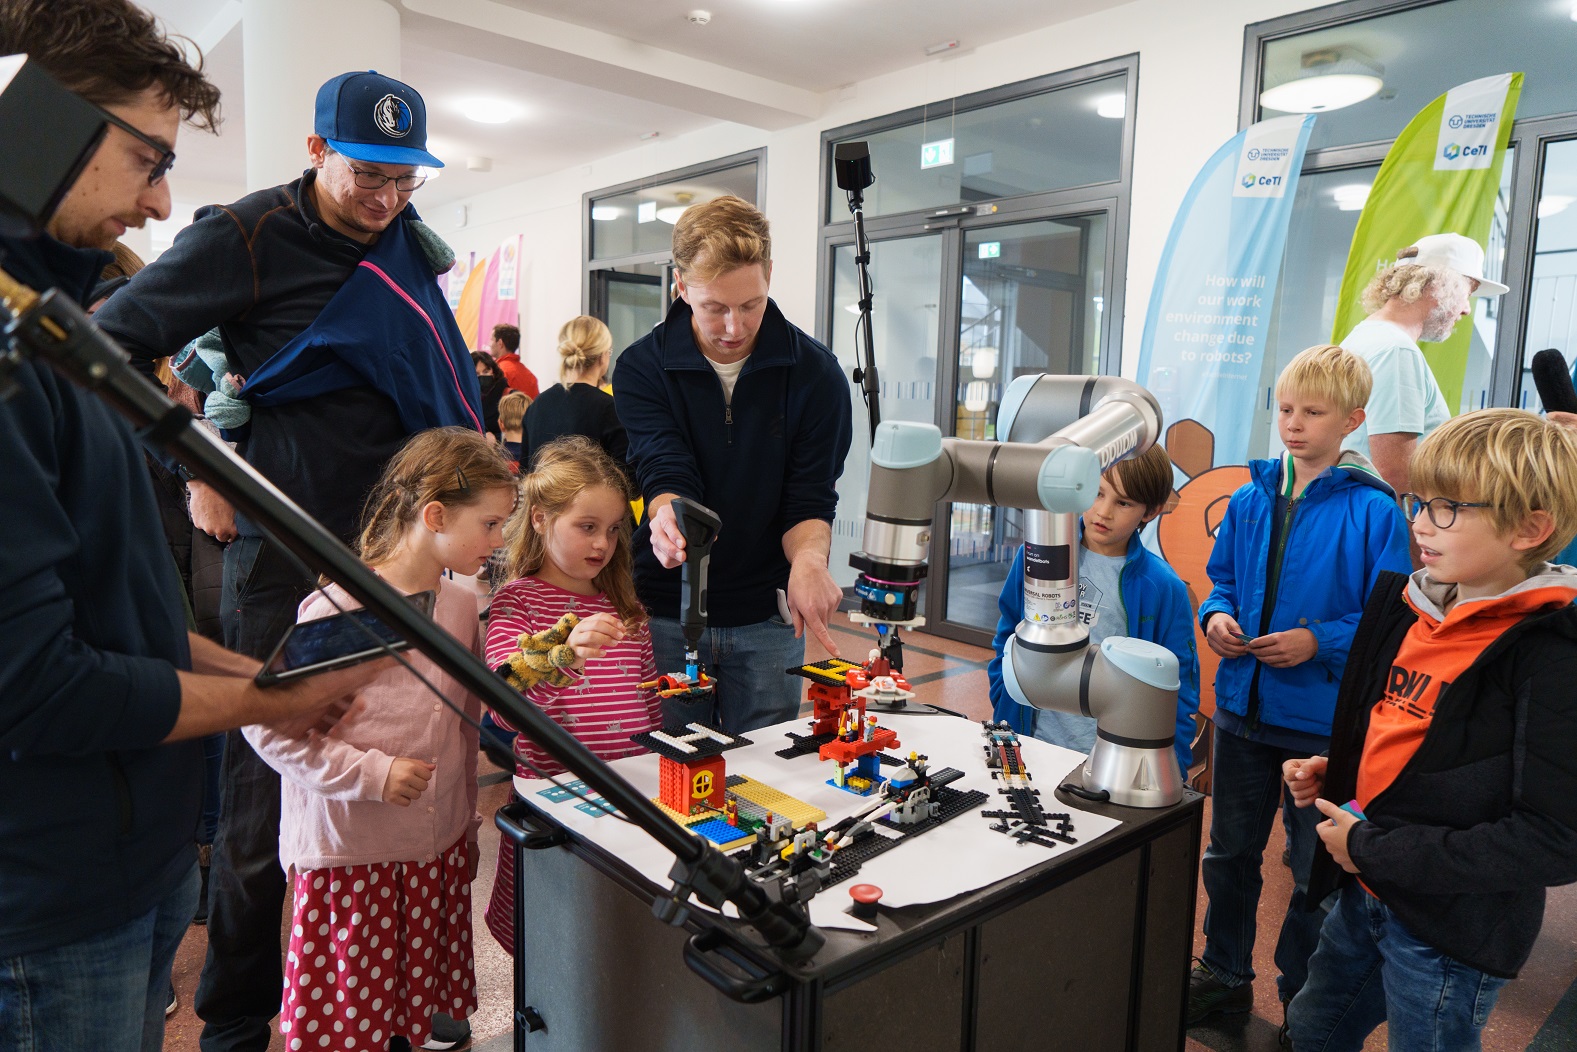 Photograph of a group of boys and girls around a robotic demonstrator while a researcher explains how it works